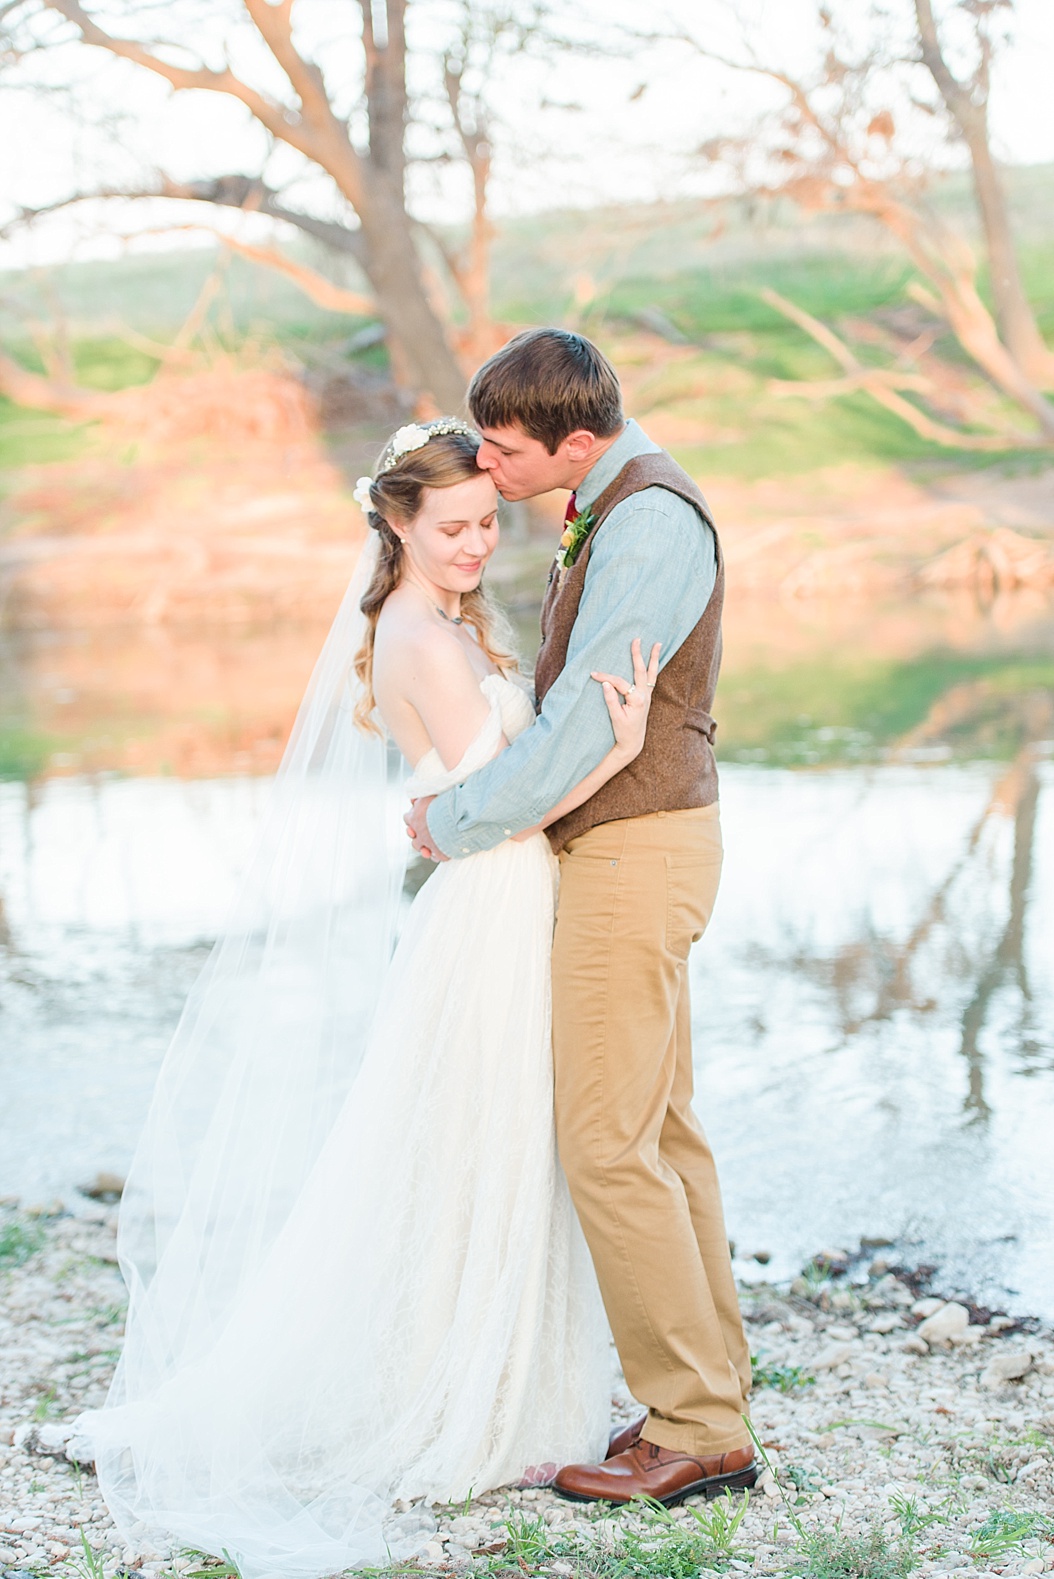 A spring boho wedding with greenery at Cherokee Rose Venue in Comfort Texas by Boerne Wedding Photographer Allison Jeffers Wedding Photography 0090